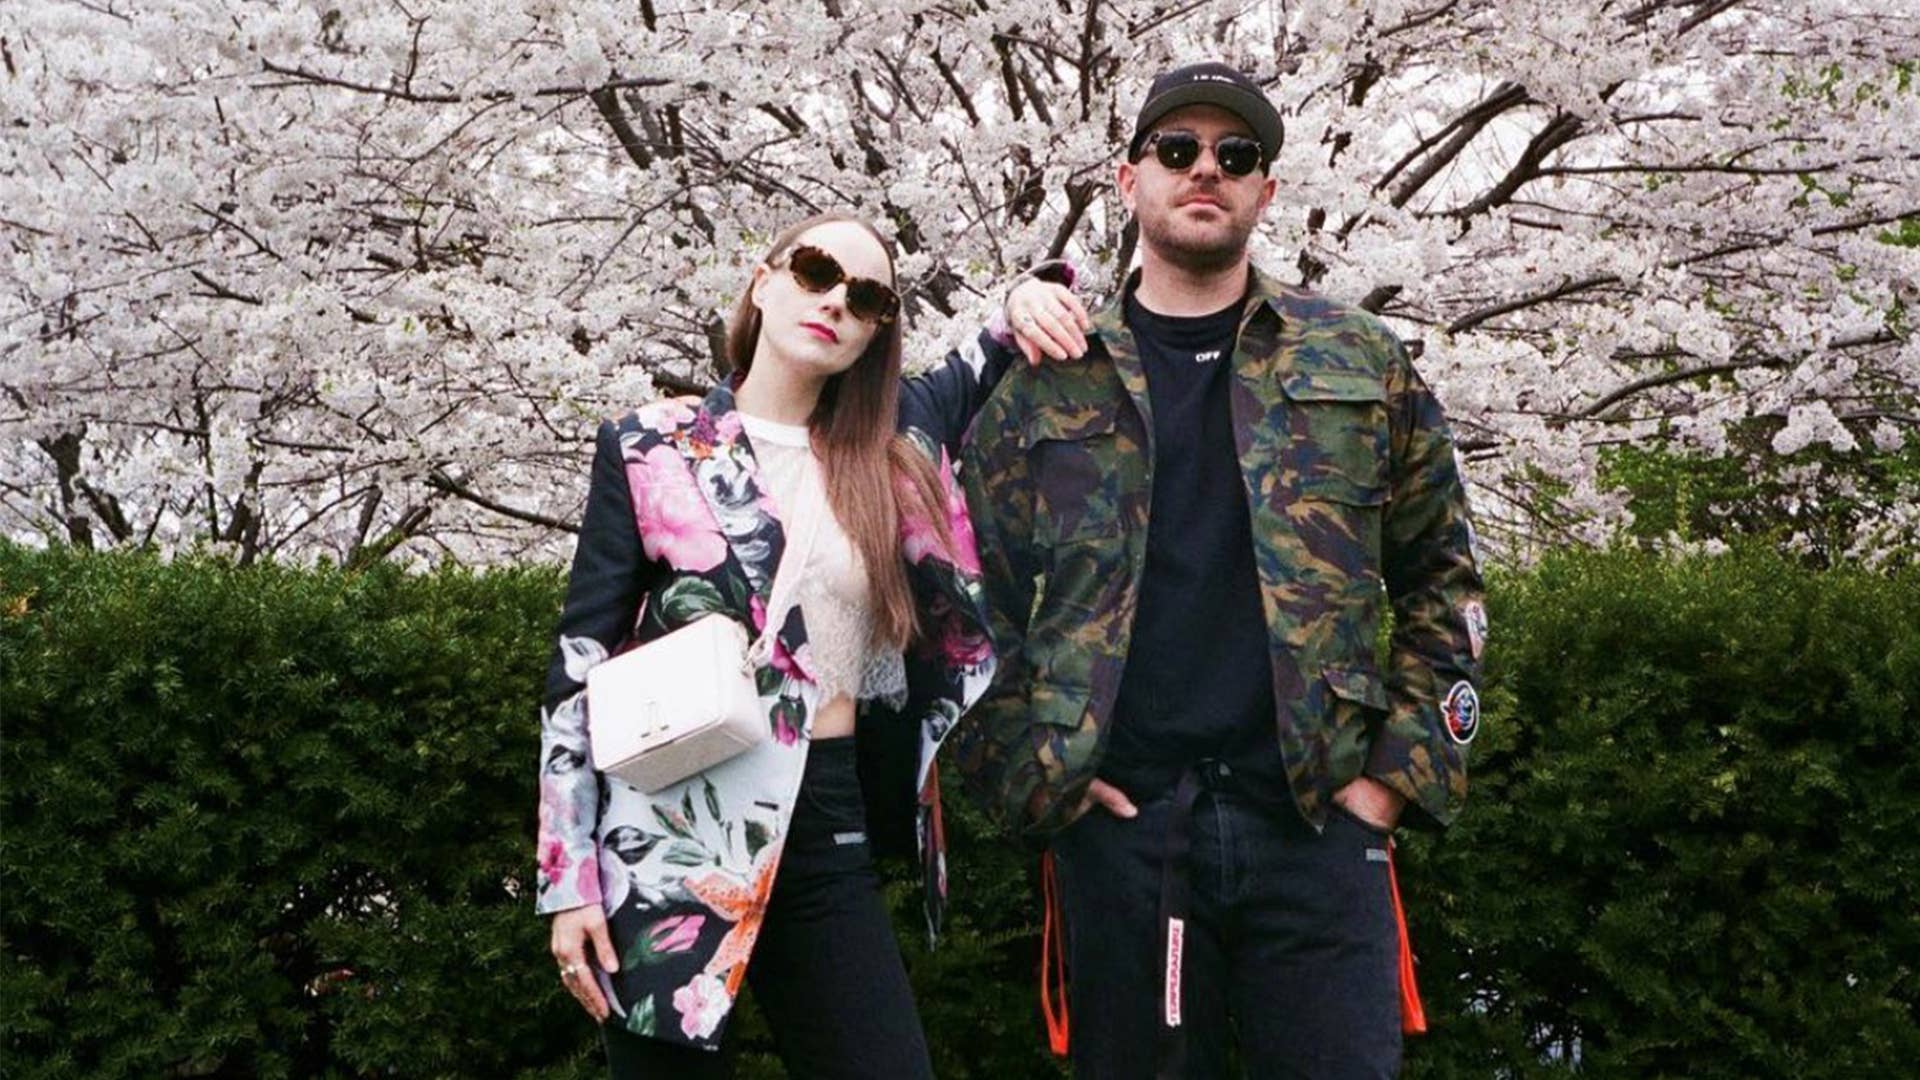 The founders of Sidewalk Hustle standing under a cherry blossom trees